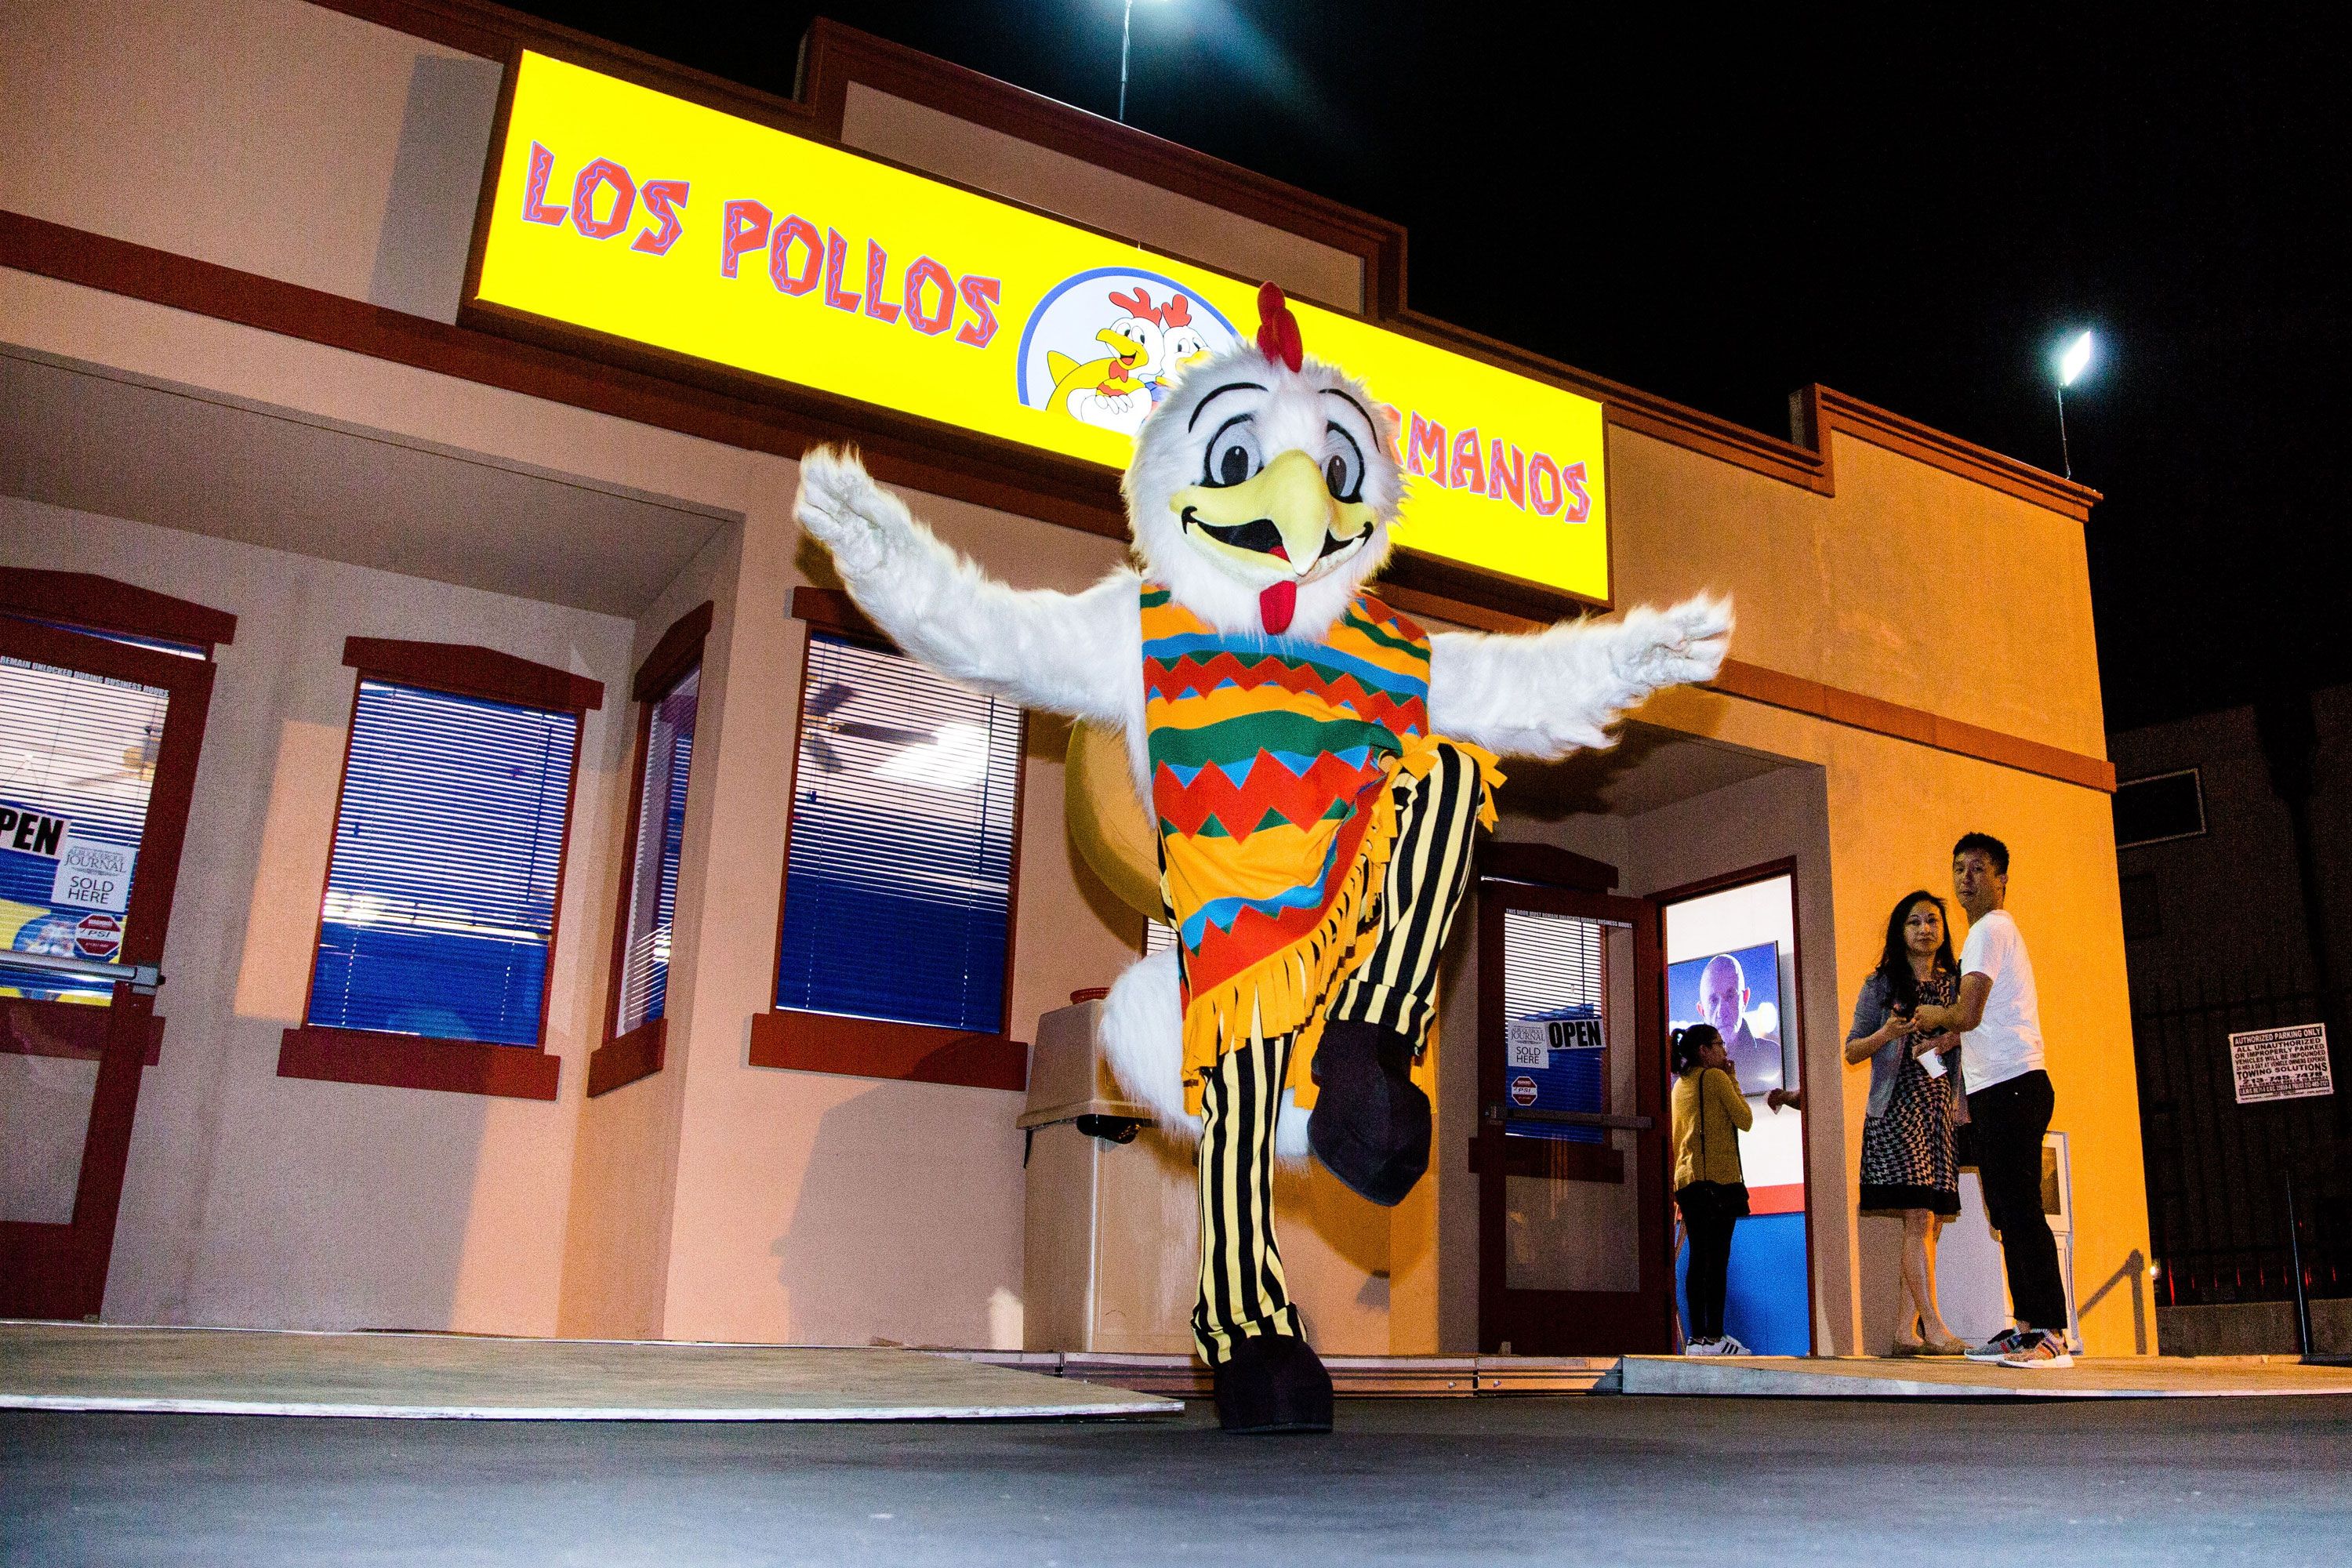 Is there a real Pollos Hermanos?